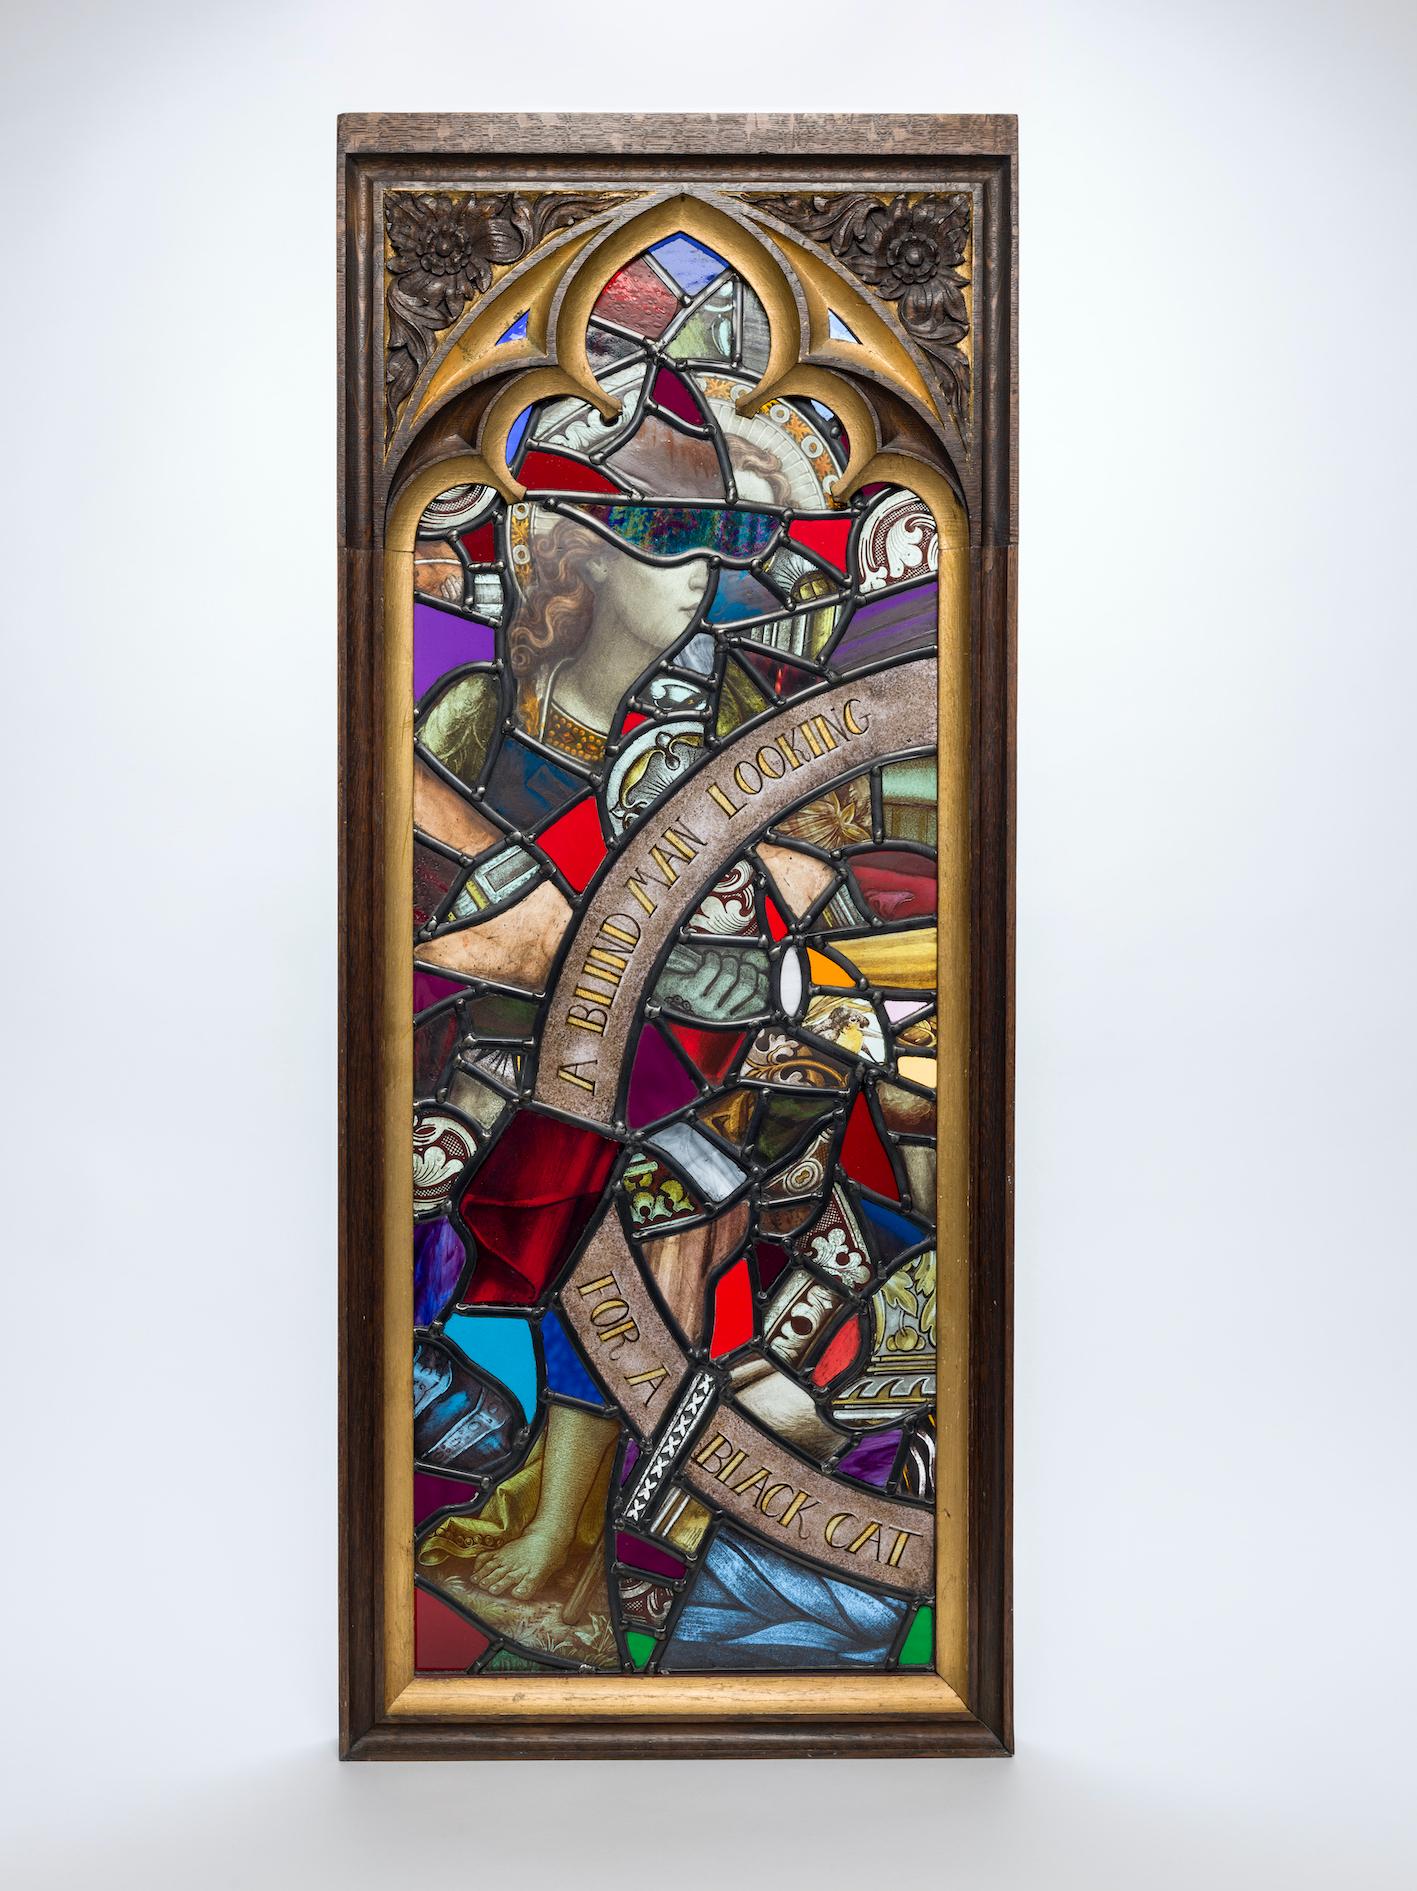 Stained glass trilogy depicting Christ shining a torch after a quote from Oscar Wilde:
‘Religion is like blind man looking in a black room for a black cat that isn’t there and finding it’
This triptych has been re-worked using antique and stained